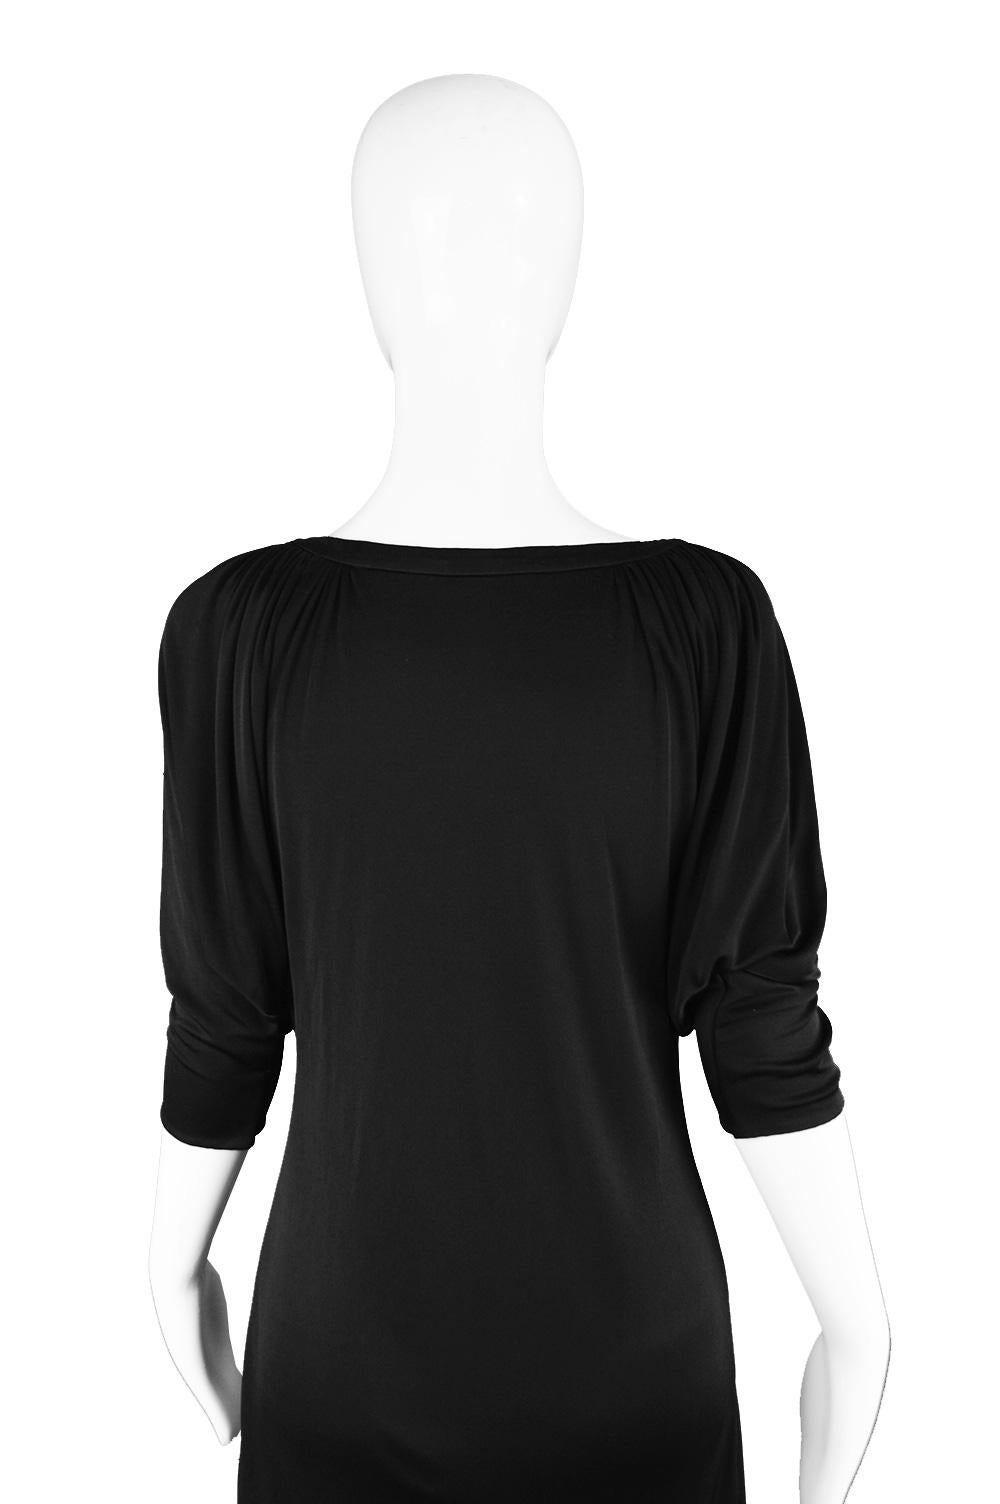 Gianni Versace Couture Black Jersey Batwing Vintage Dress, Spring 2001 For Sale 3